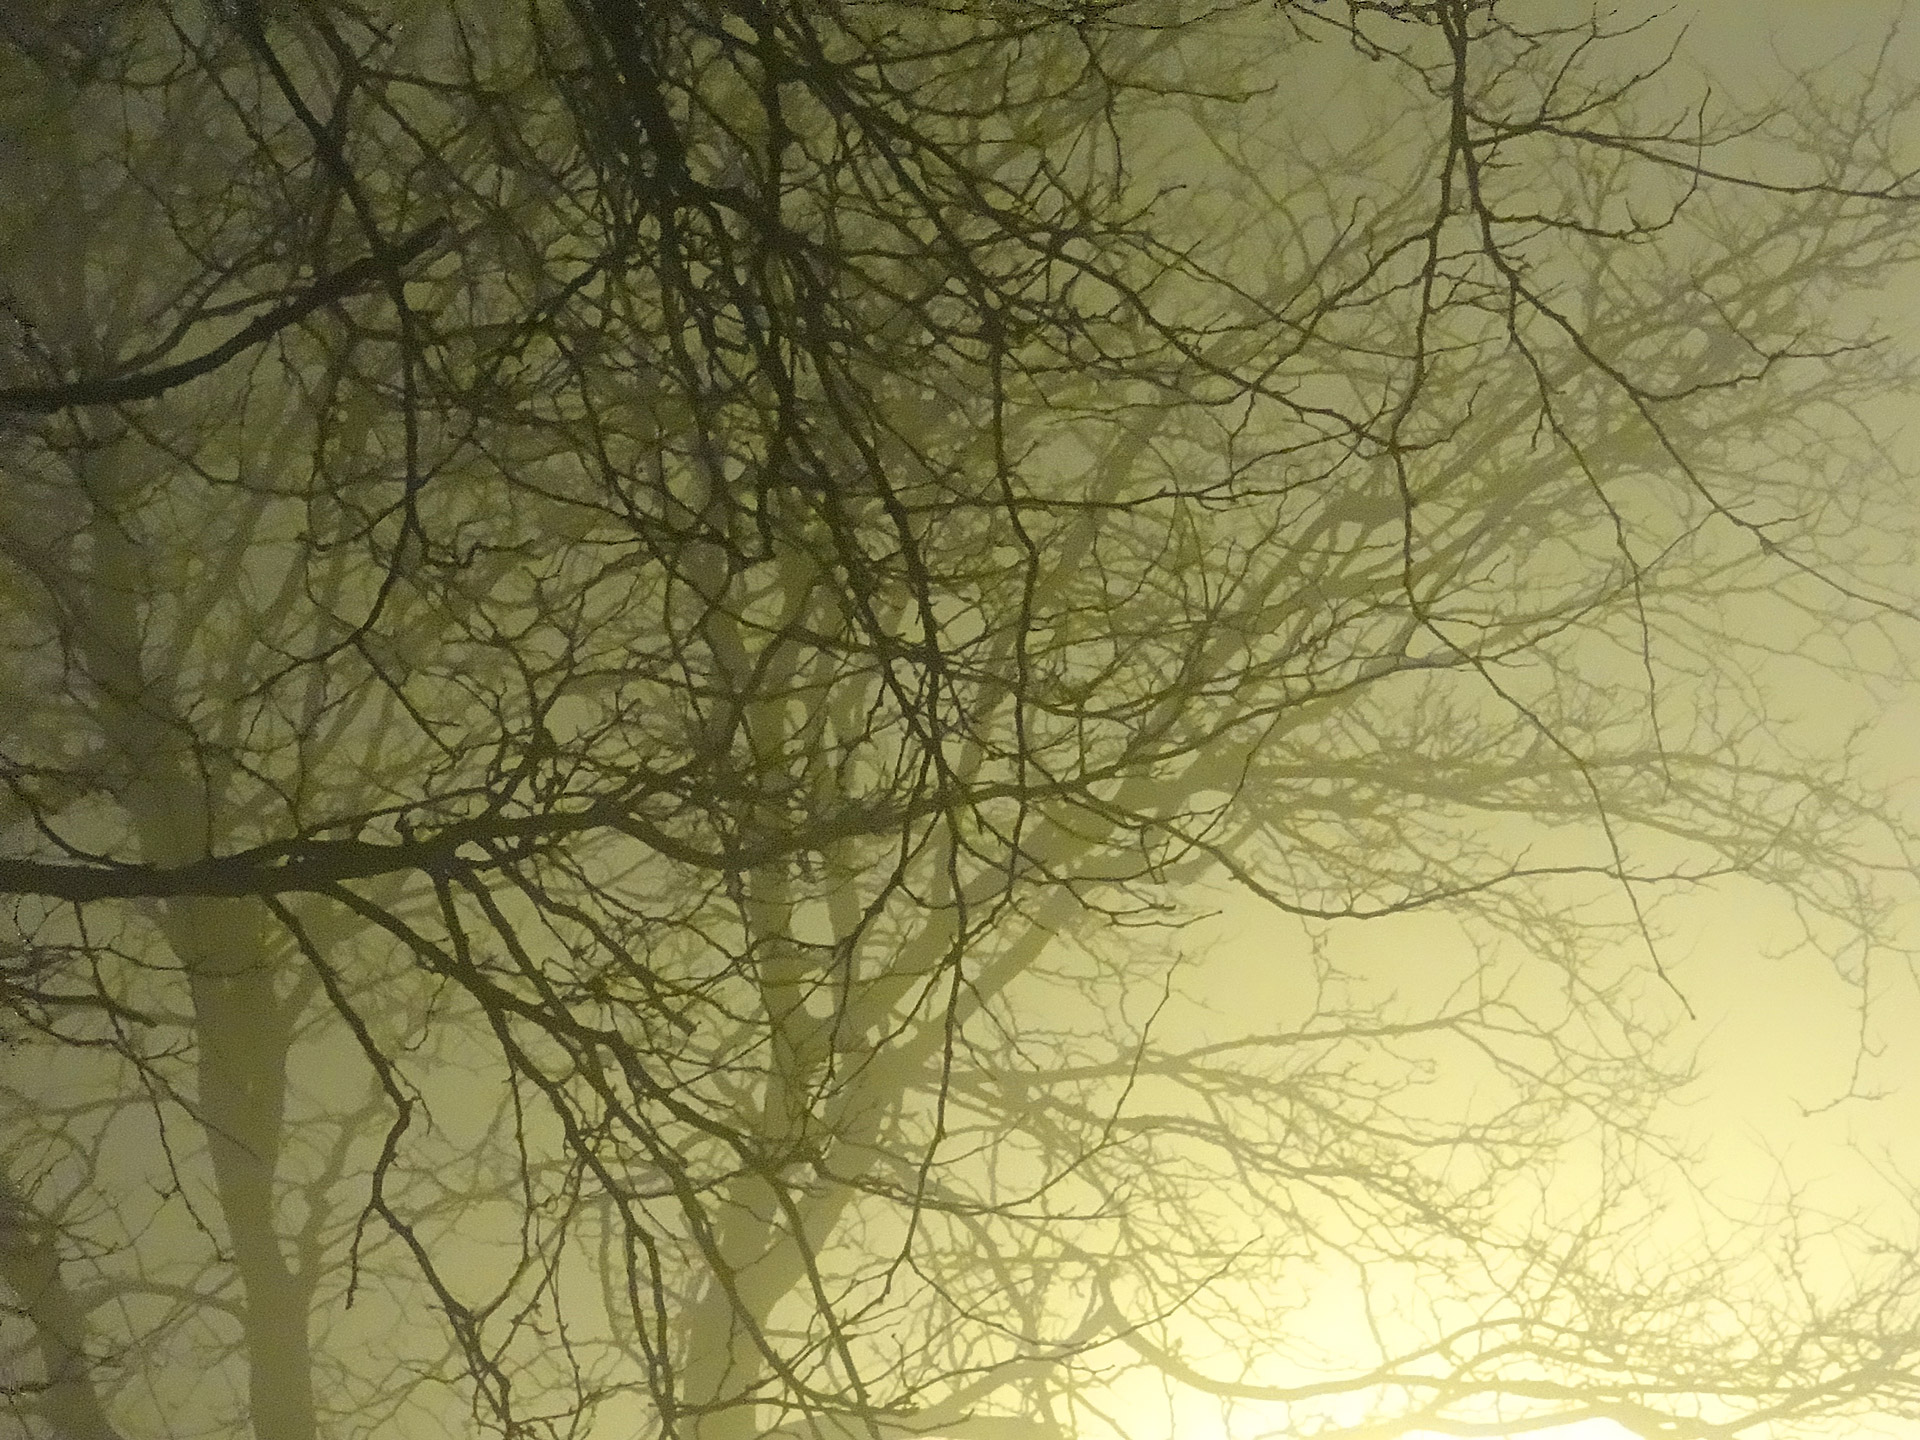 A very foggy night in the Midwest...look likes a night right out of a Stephen King novel.